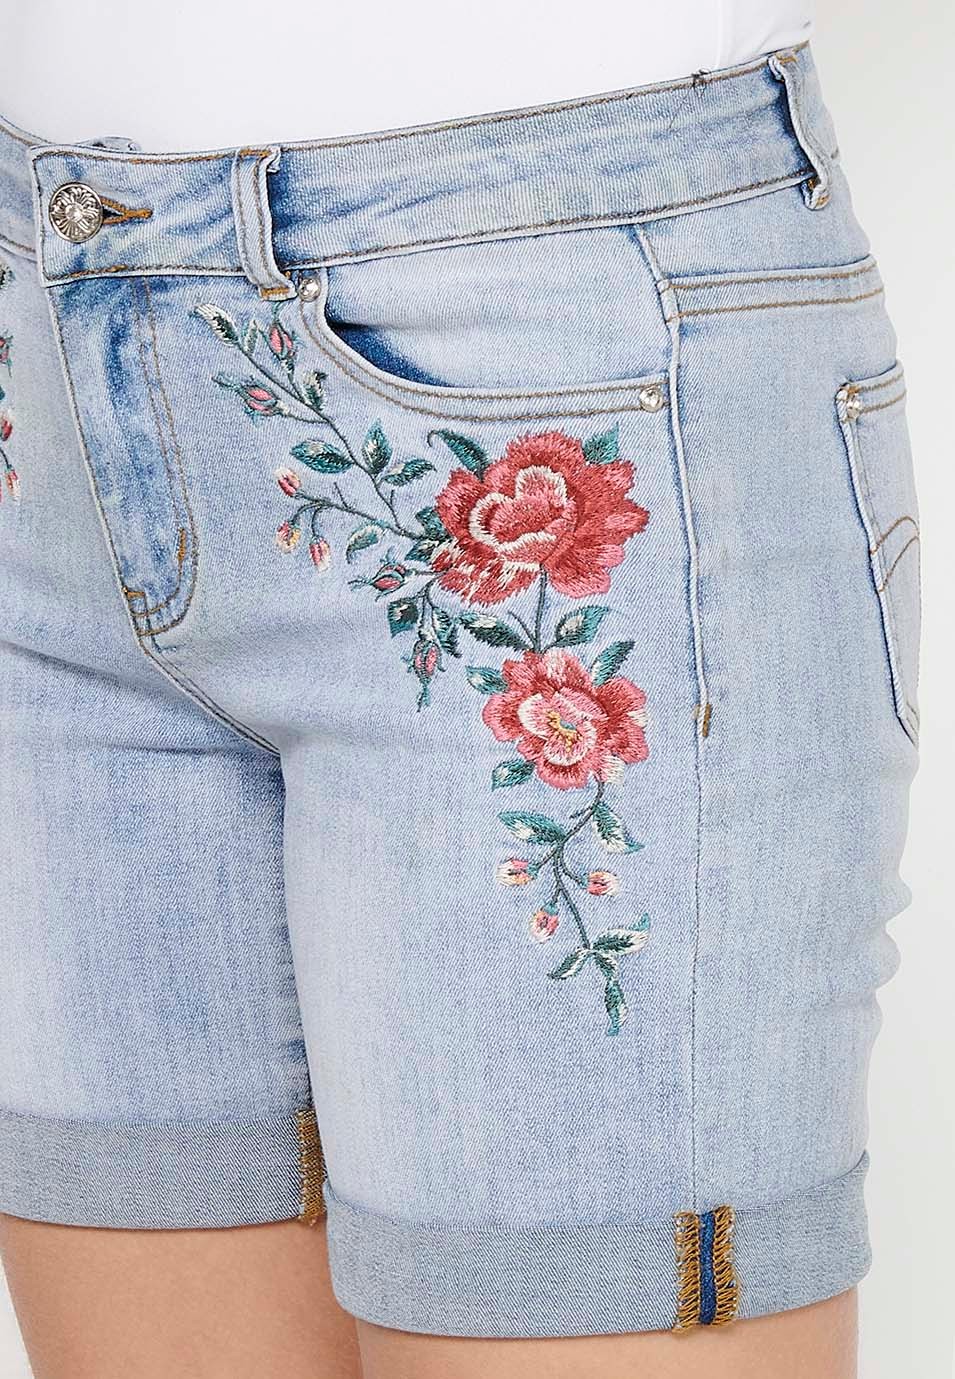 Denim shorts with front zipper and button closure and front floral embroidered details with five pockets, one blue pocket pocket for women 5